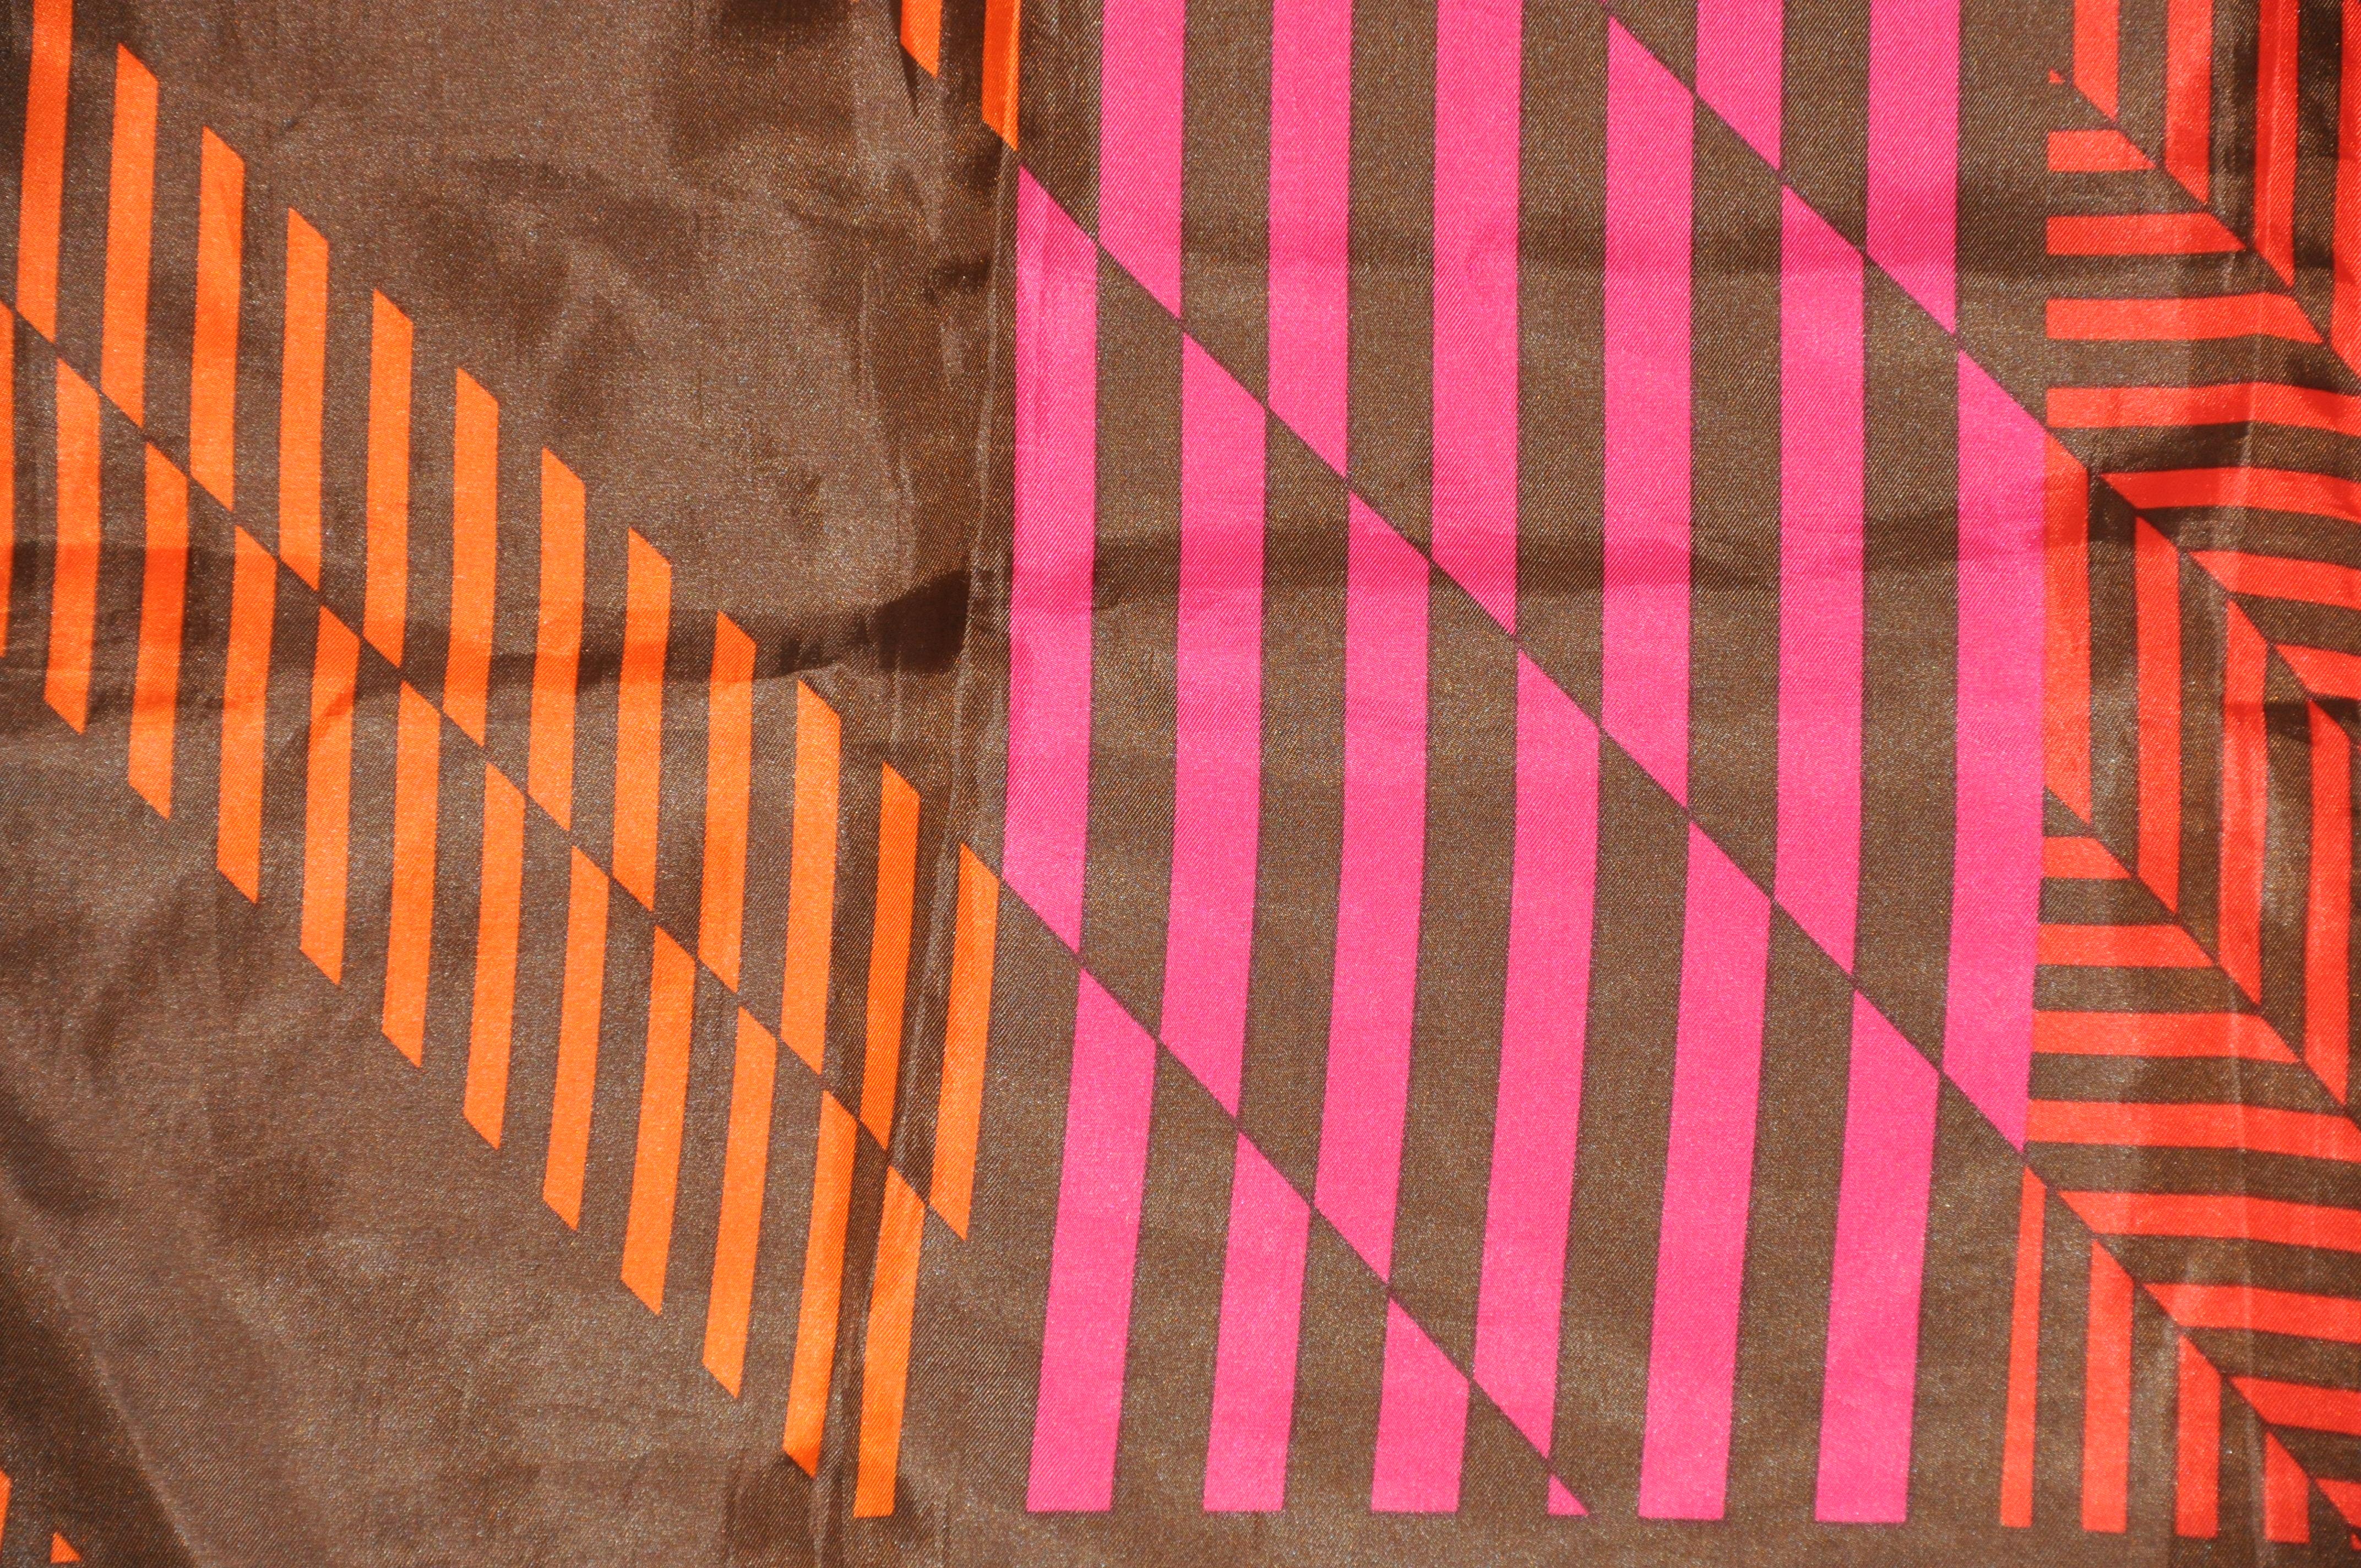        Whimsical coco brown borders surrounding abstract tangerine & fuchsia stripes polyester scarf measures 26 inches by 27 inches, and finished with rolled edges. Made in Japan.